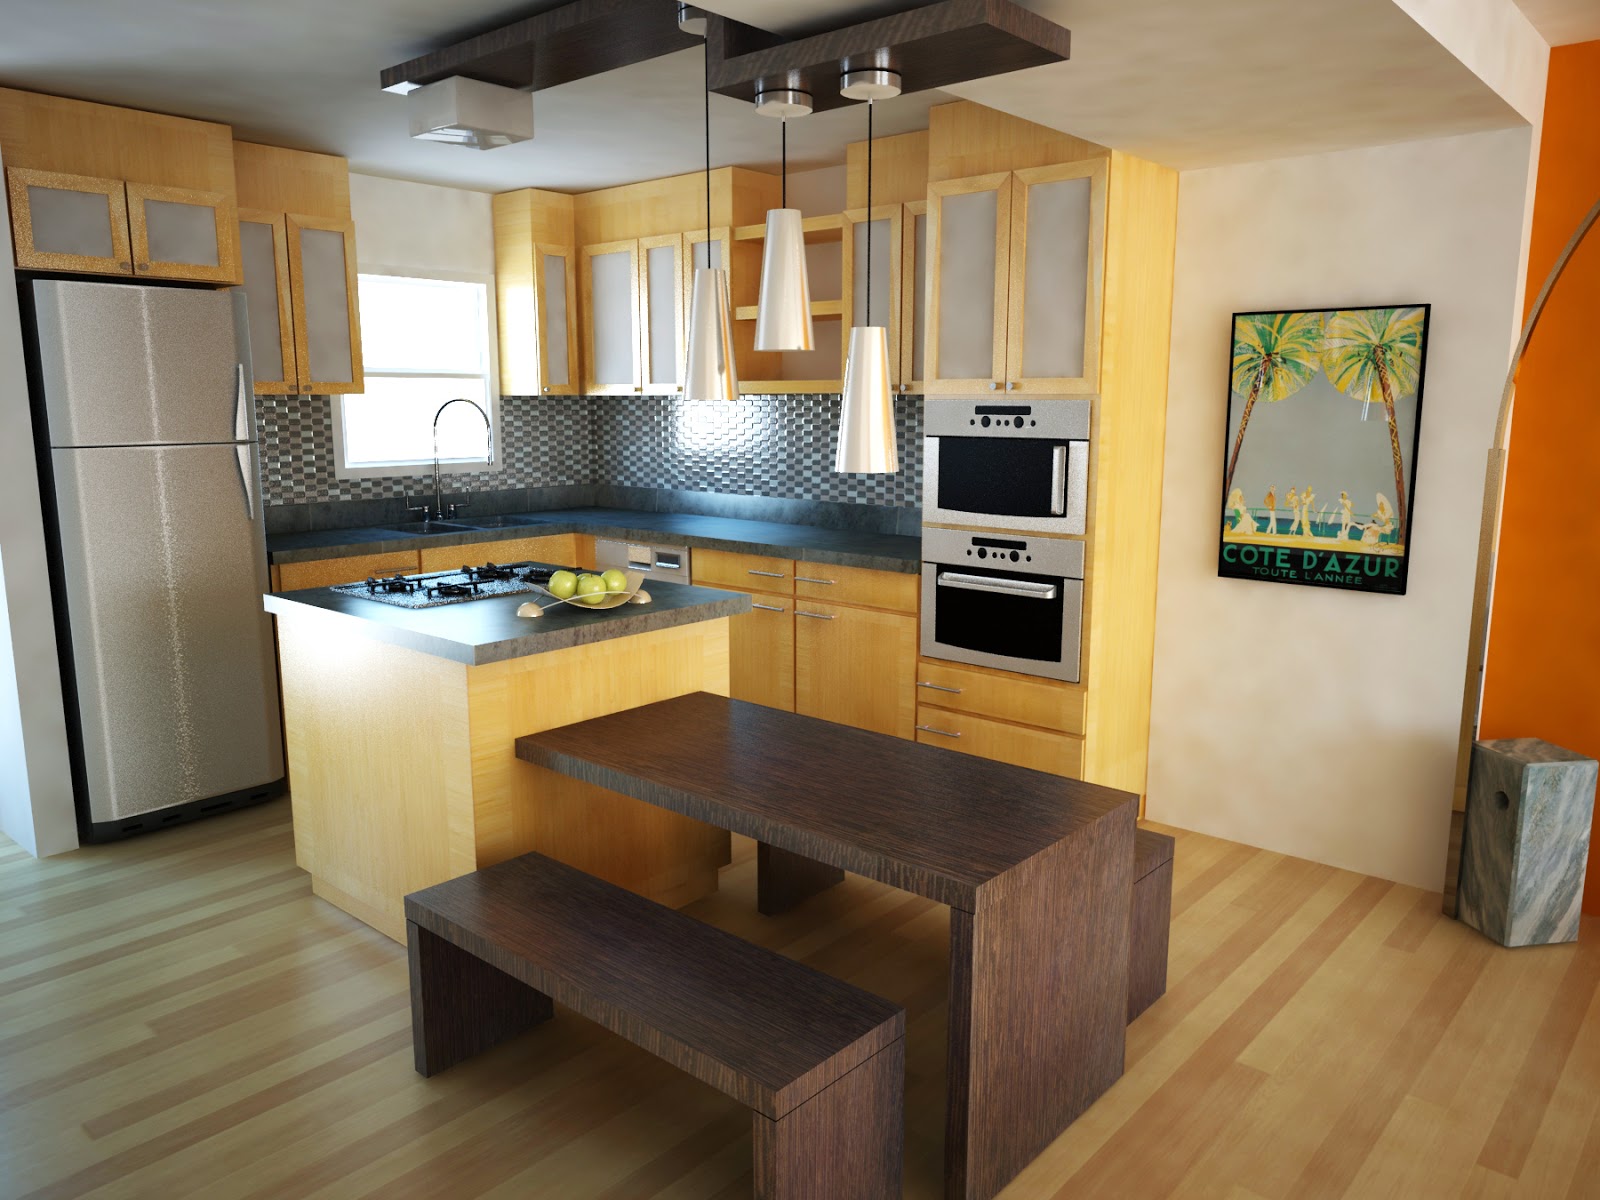 Remodeling Small Kitchen Ideas